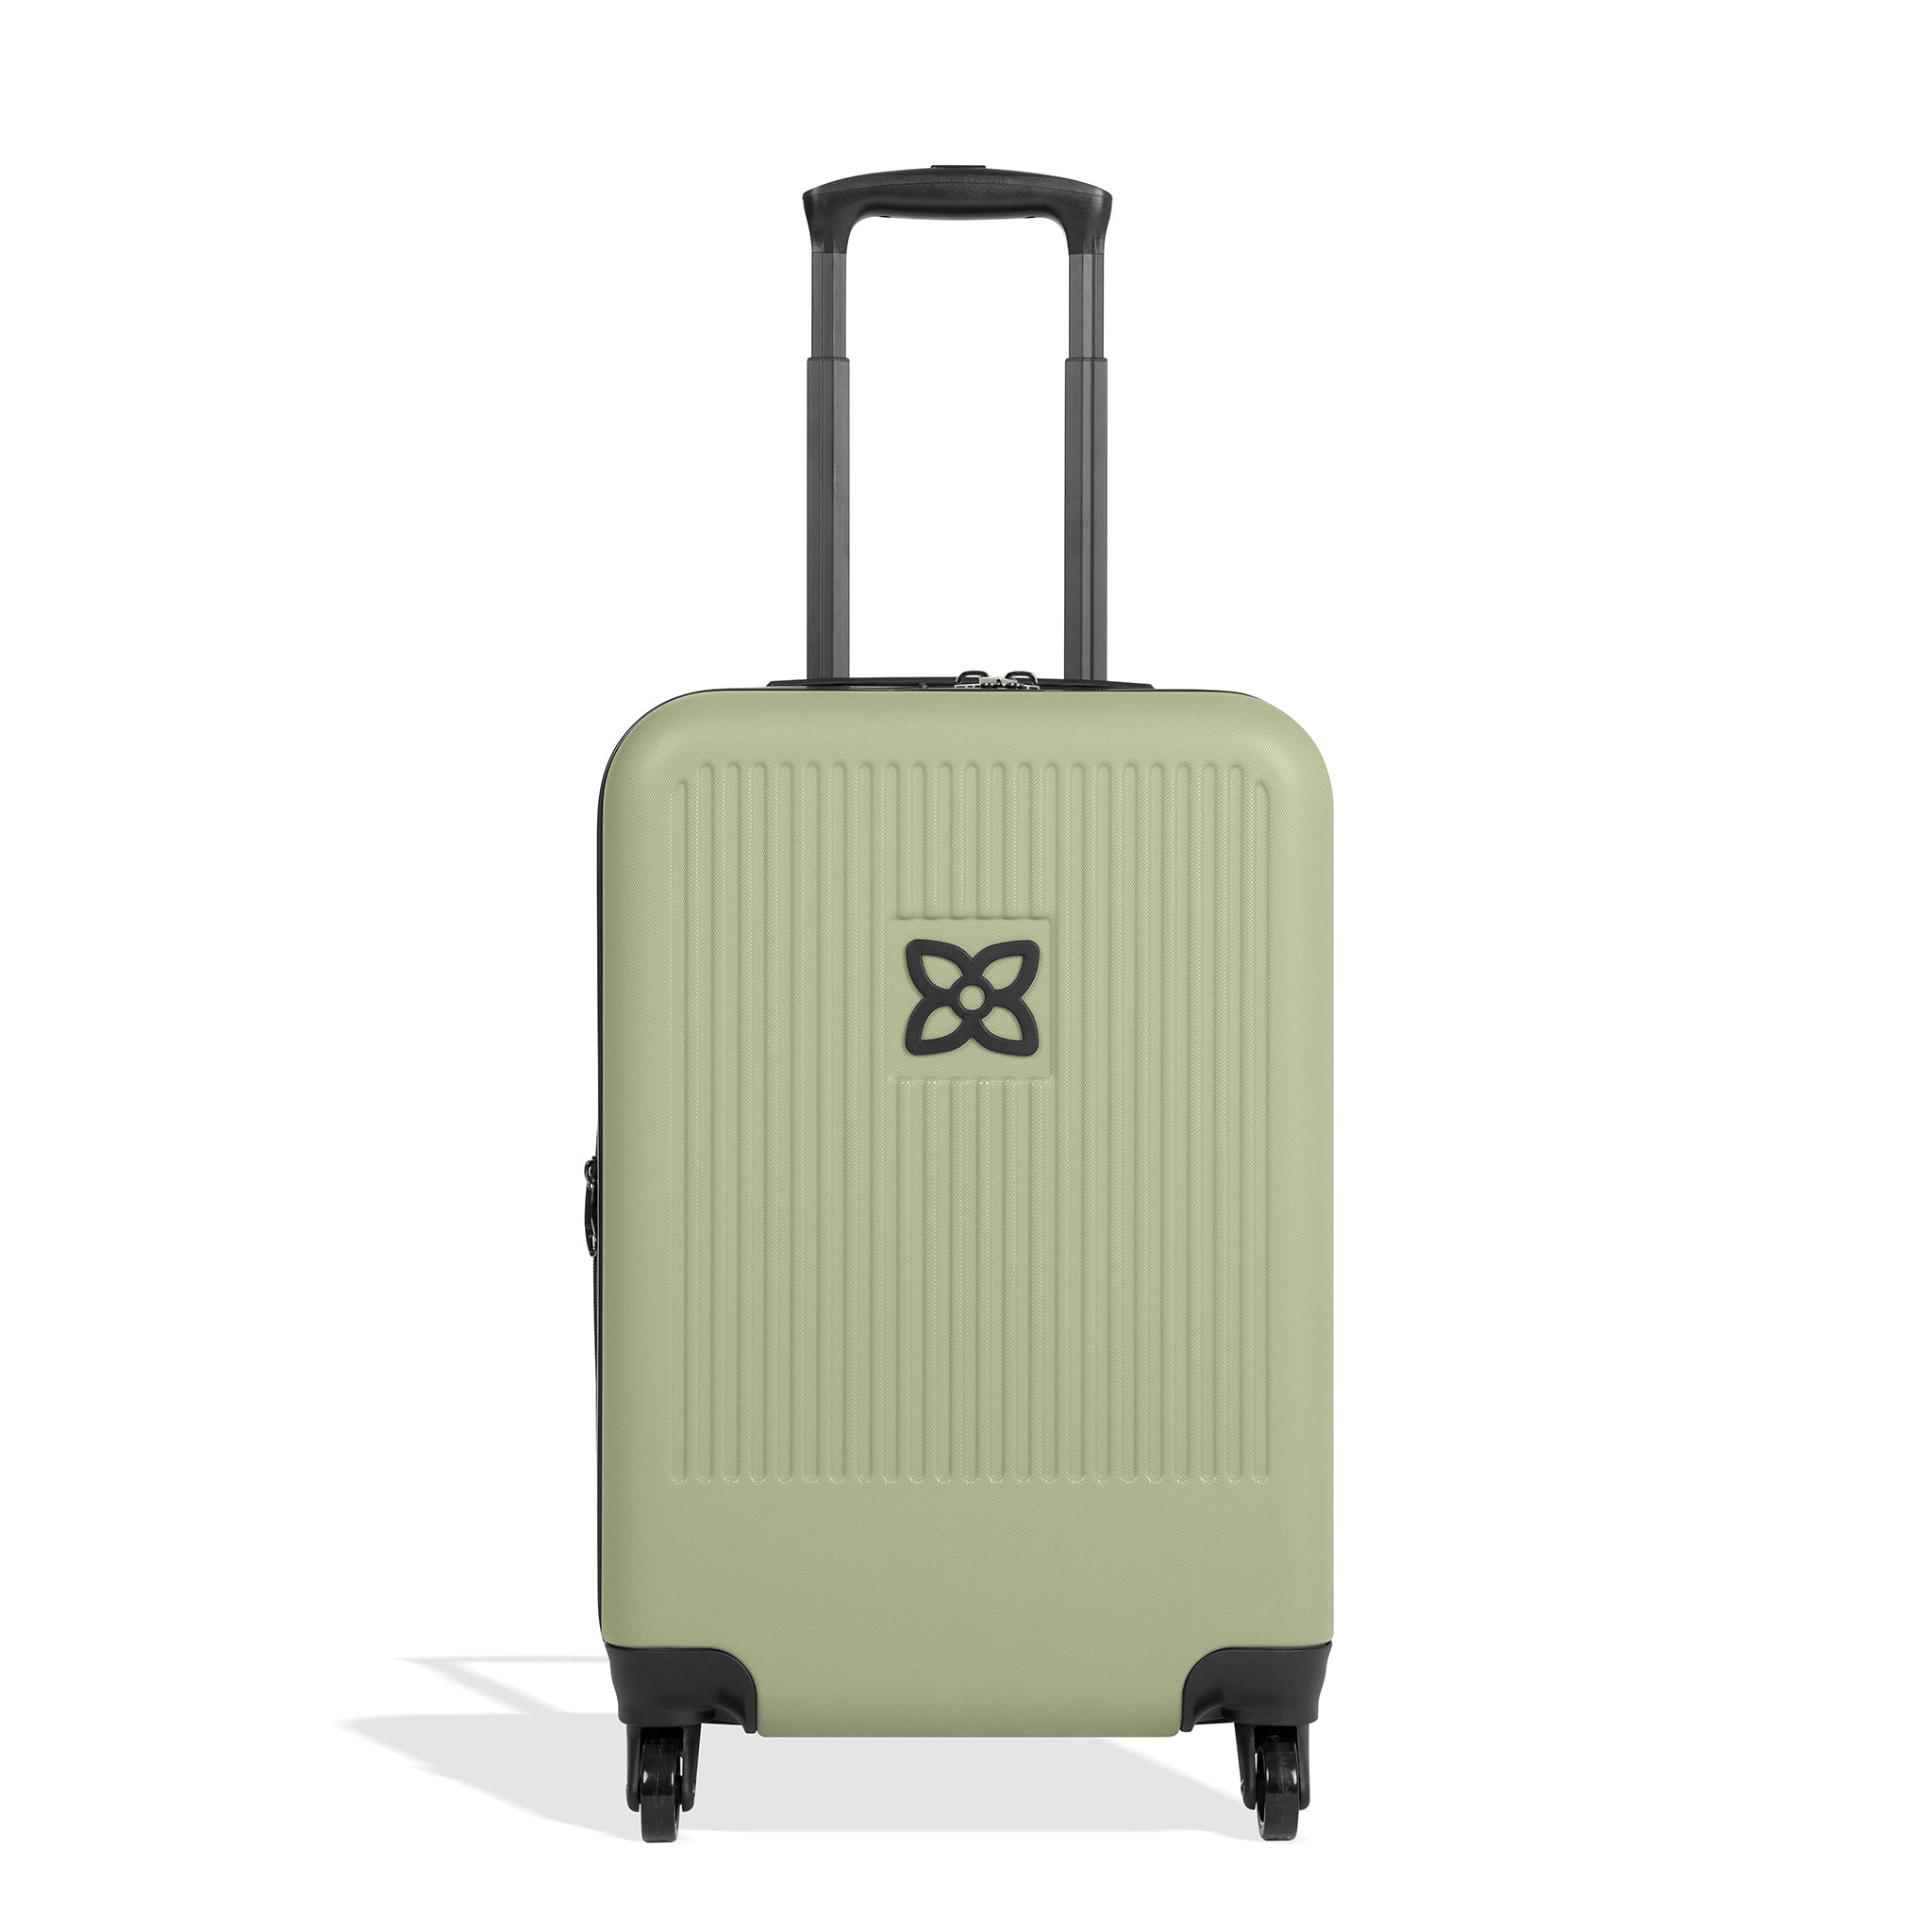 Flat front view of Sherpani hard-shell carry-on luggage, the Meridian in Sage. Meridian features include a retractable luggage handle, uncrushable exterior, TSA-approved locking zippers and four 36-degree spinner wheels. The Sage color is two-toned with the front of the suitcase in sage green and the back in classic black. 